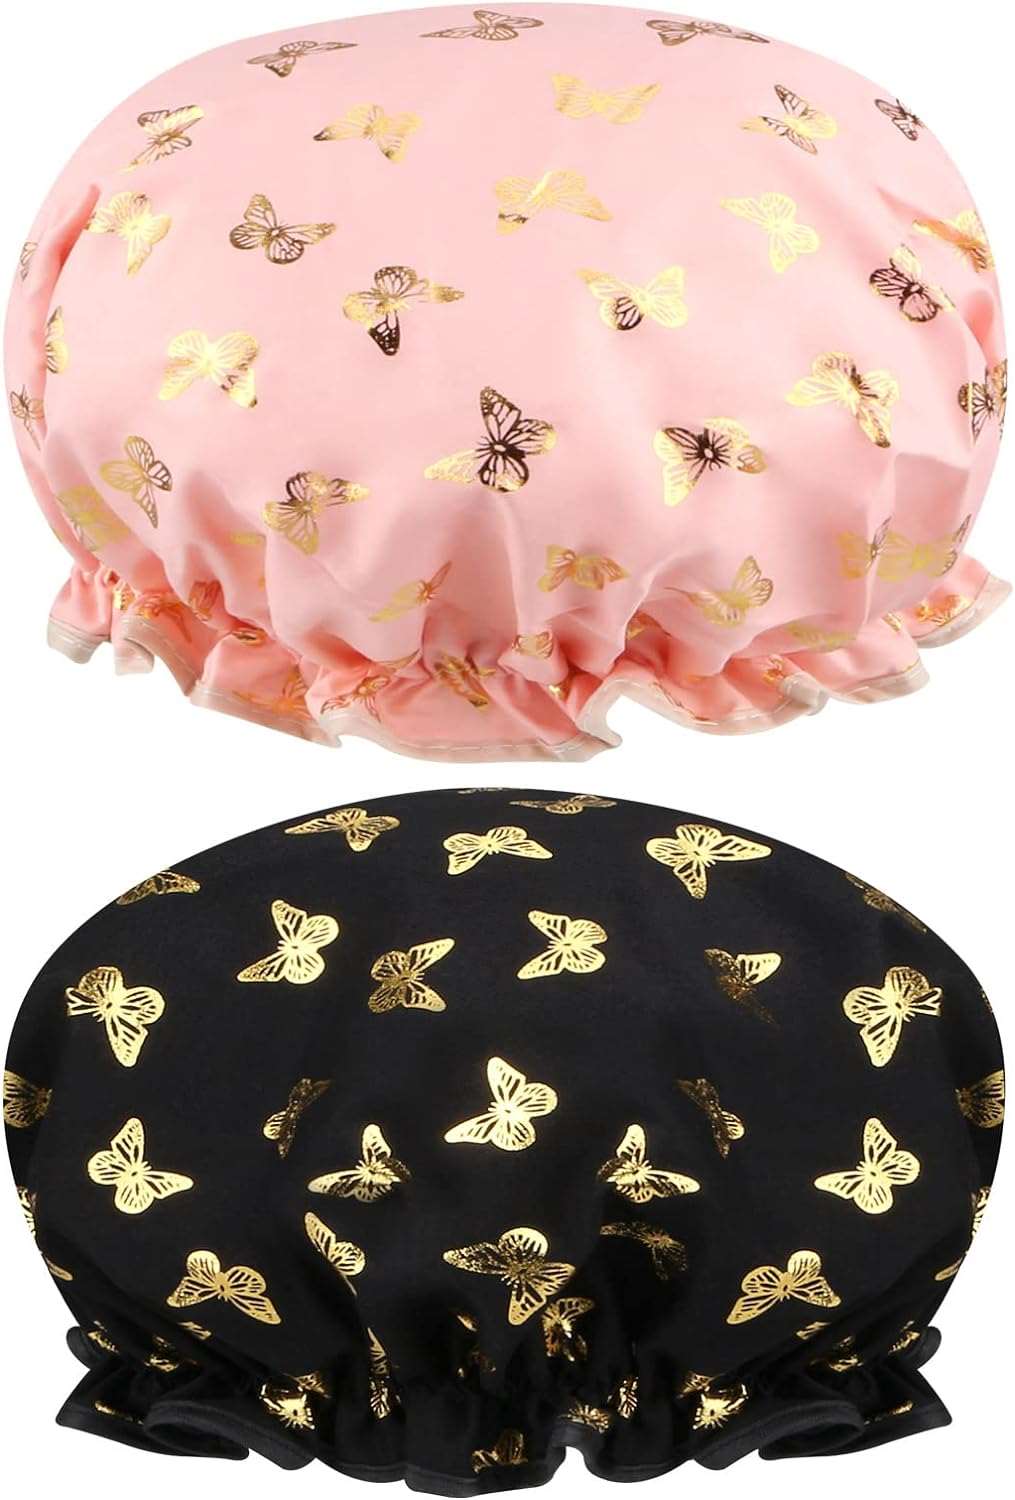 2 PCS Shower Cap Elastic Band Waterproof Bath Caps Double Layers Reusable With Ruffled Edge Covering Ears for Girls and Women